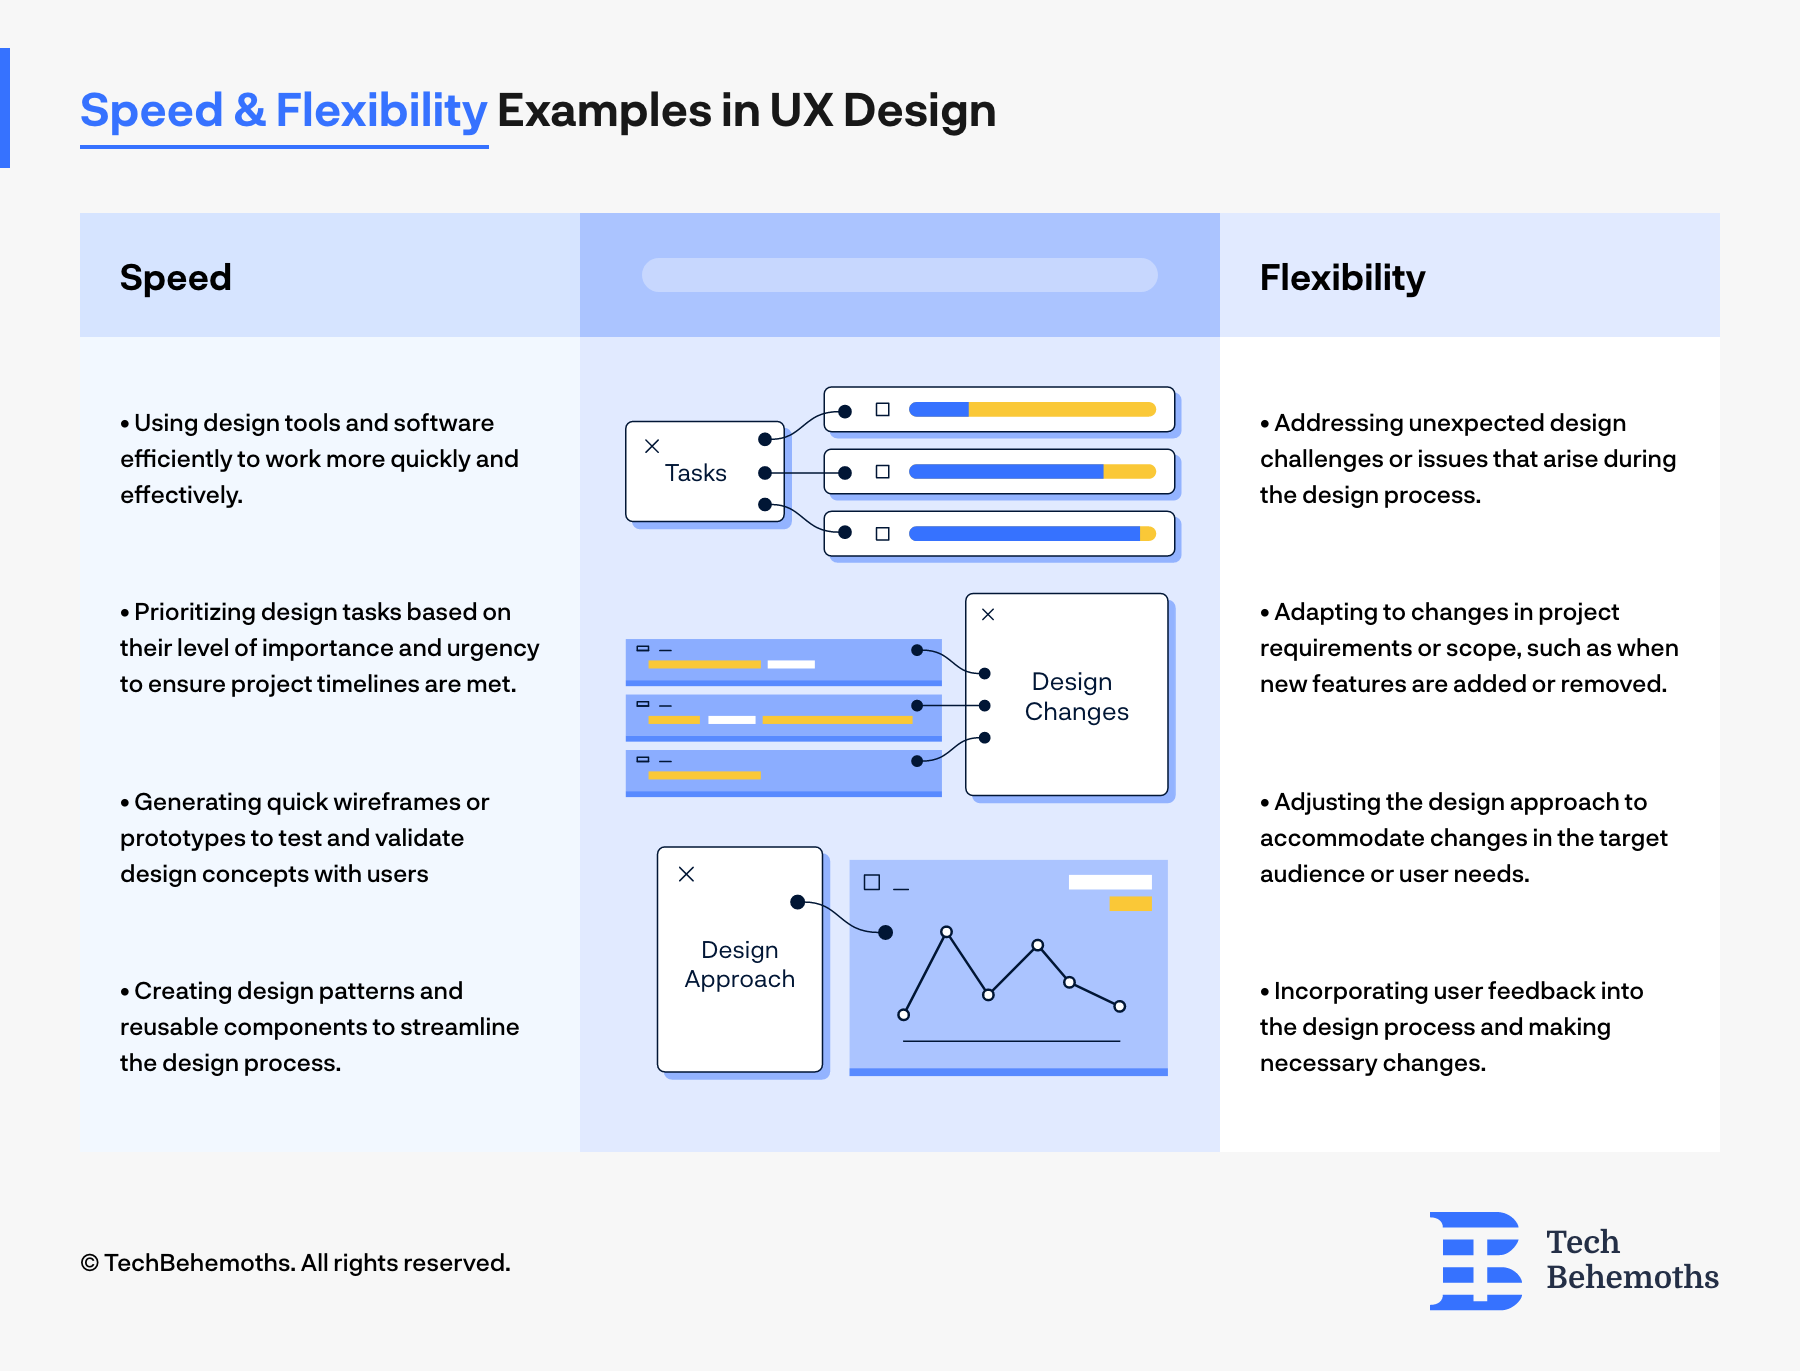 Speed & Flexibility Examples in UX Design